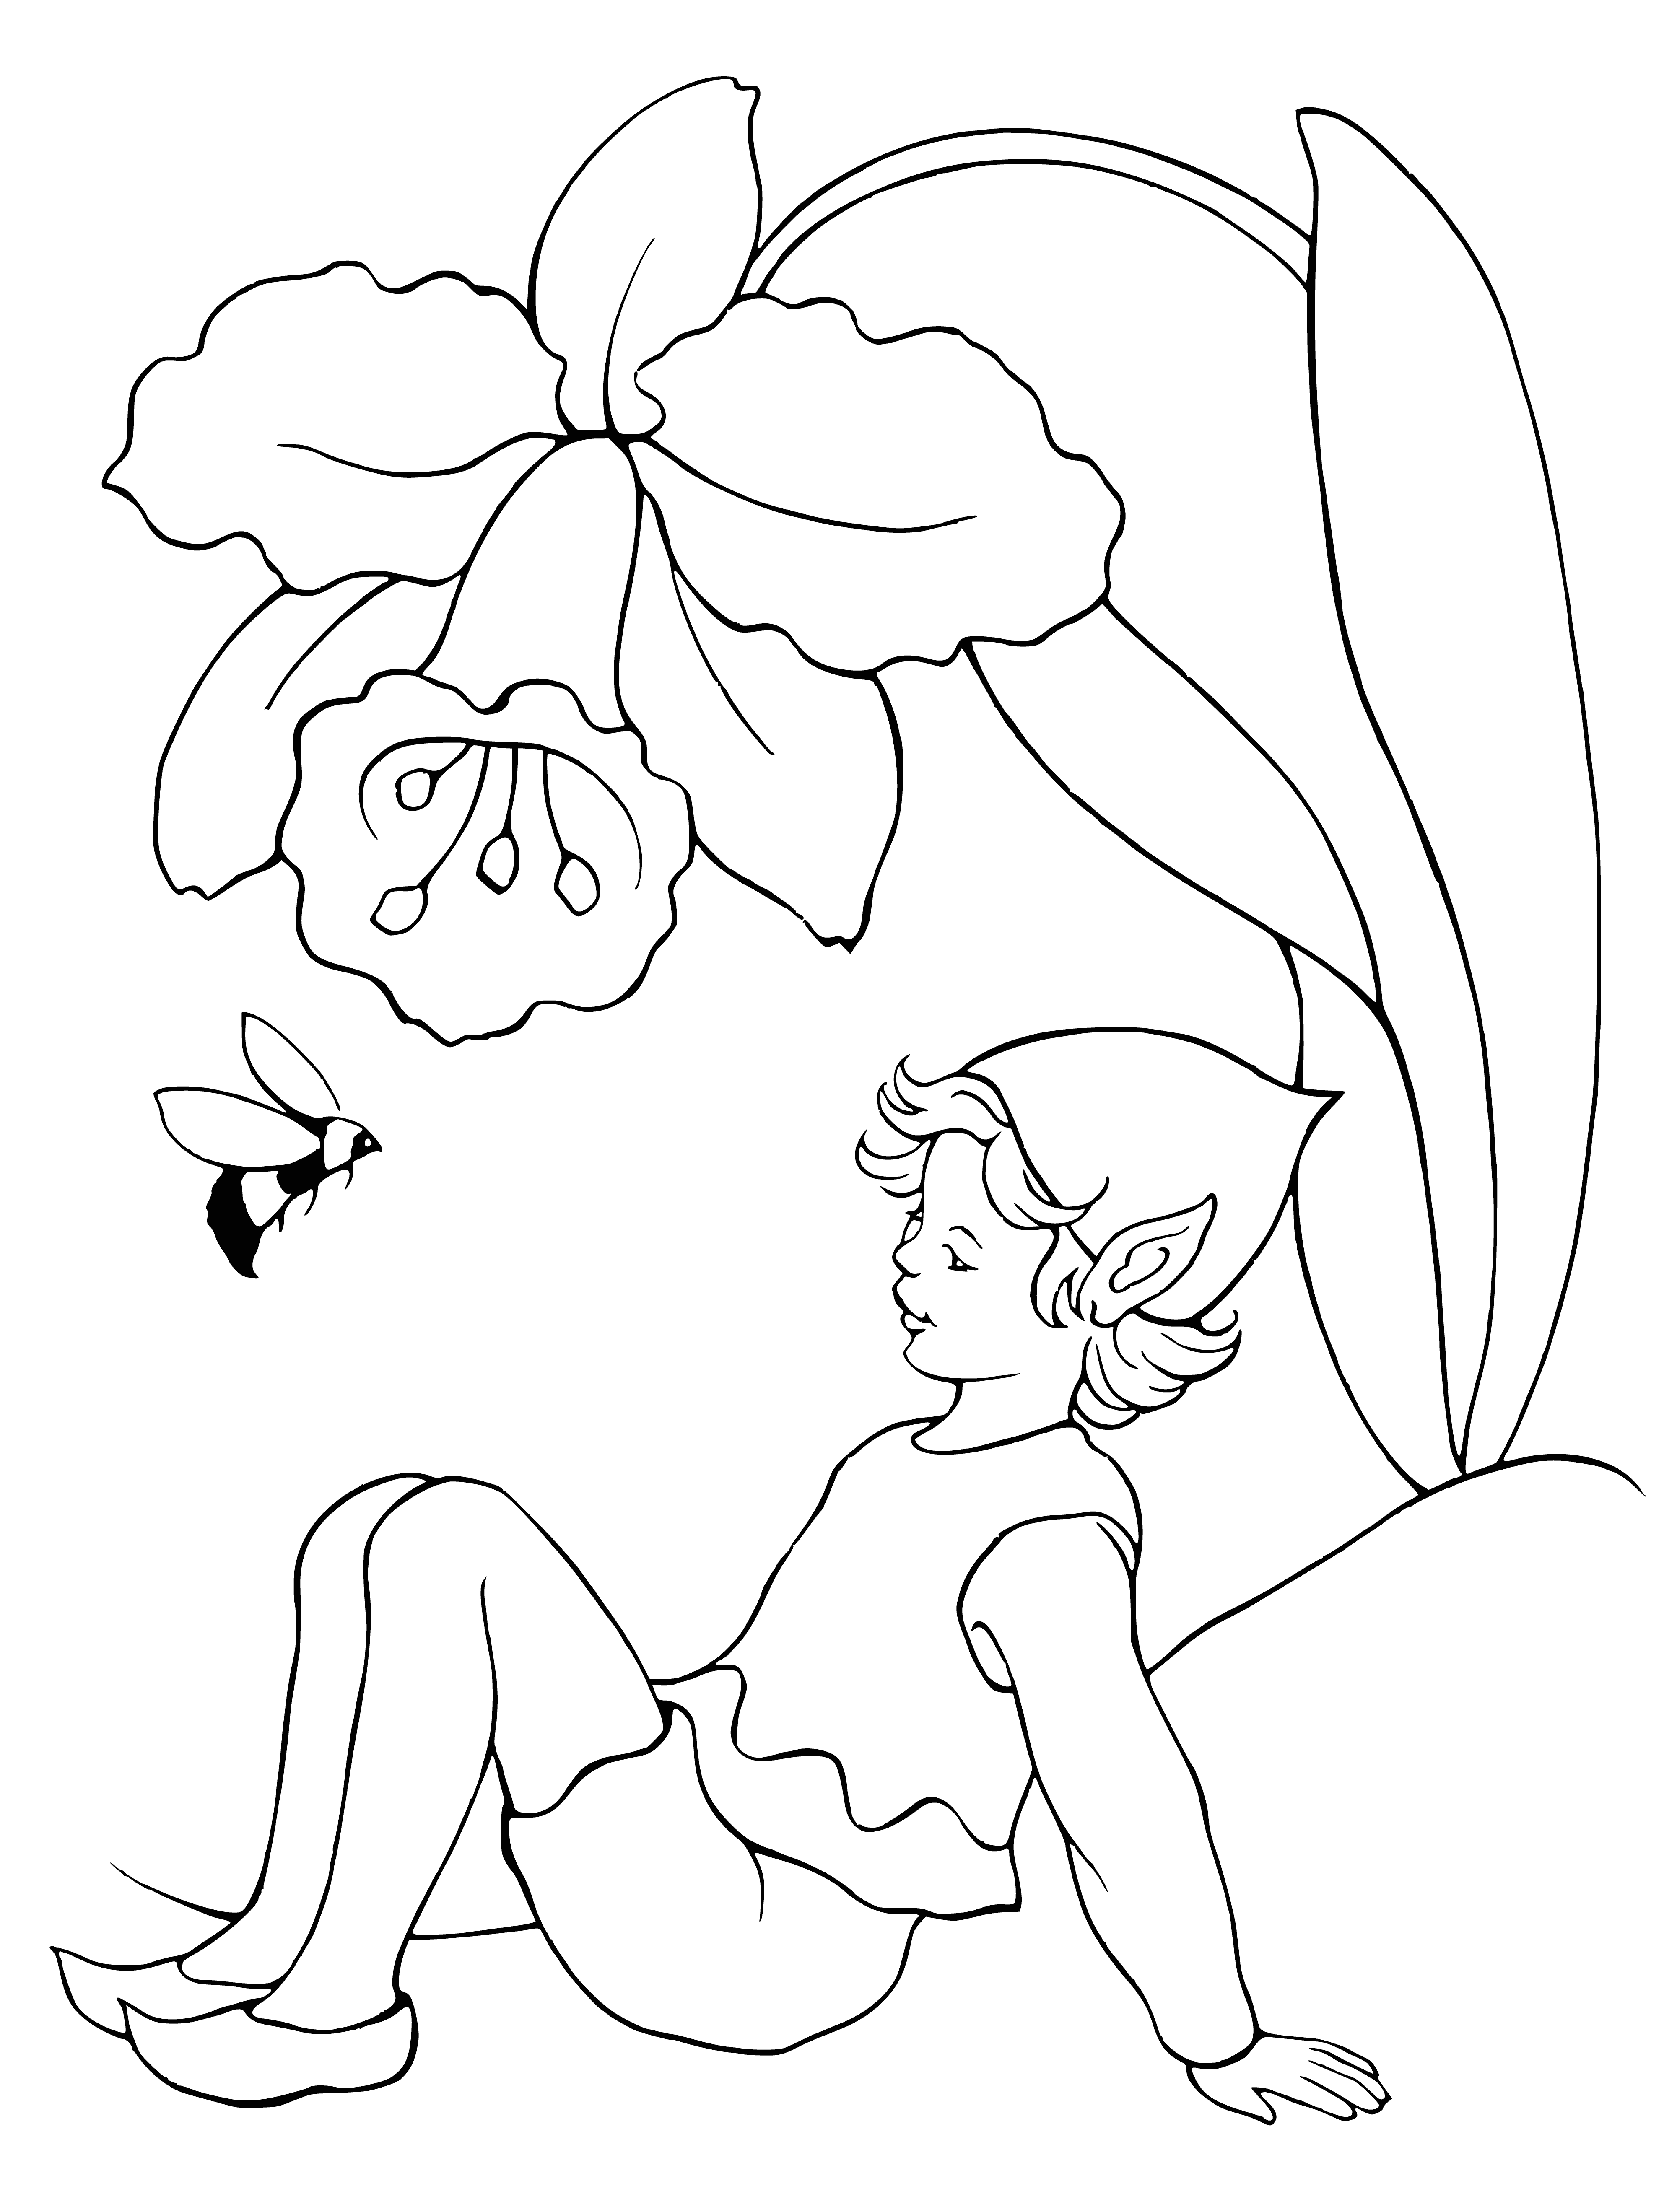 coloring page: Two elves play near flowers; one flying, one perched on petals. Clothes of leaves, and a bumblebee flying nearby, they all feel the joy of the day.